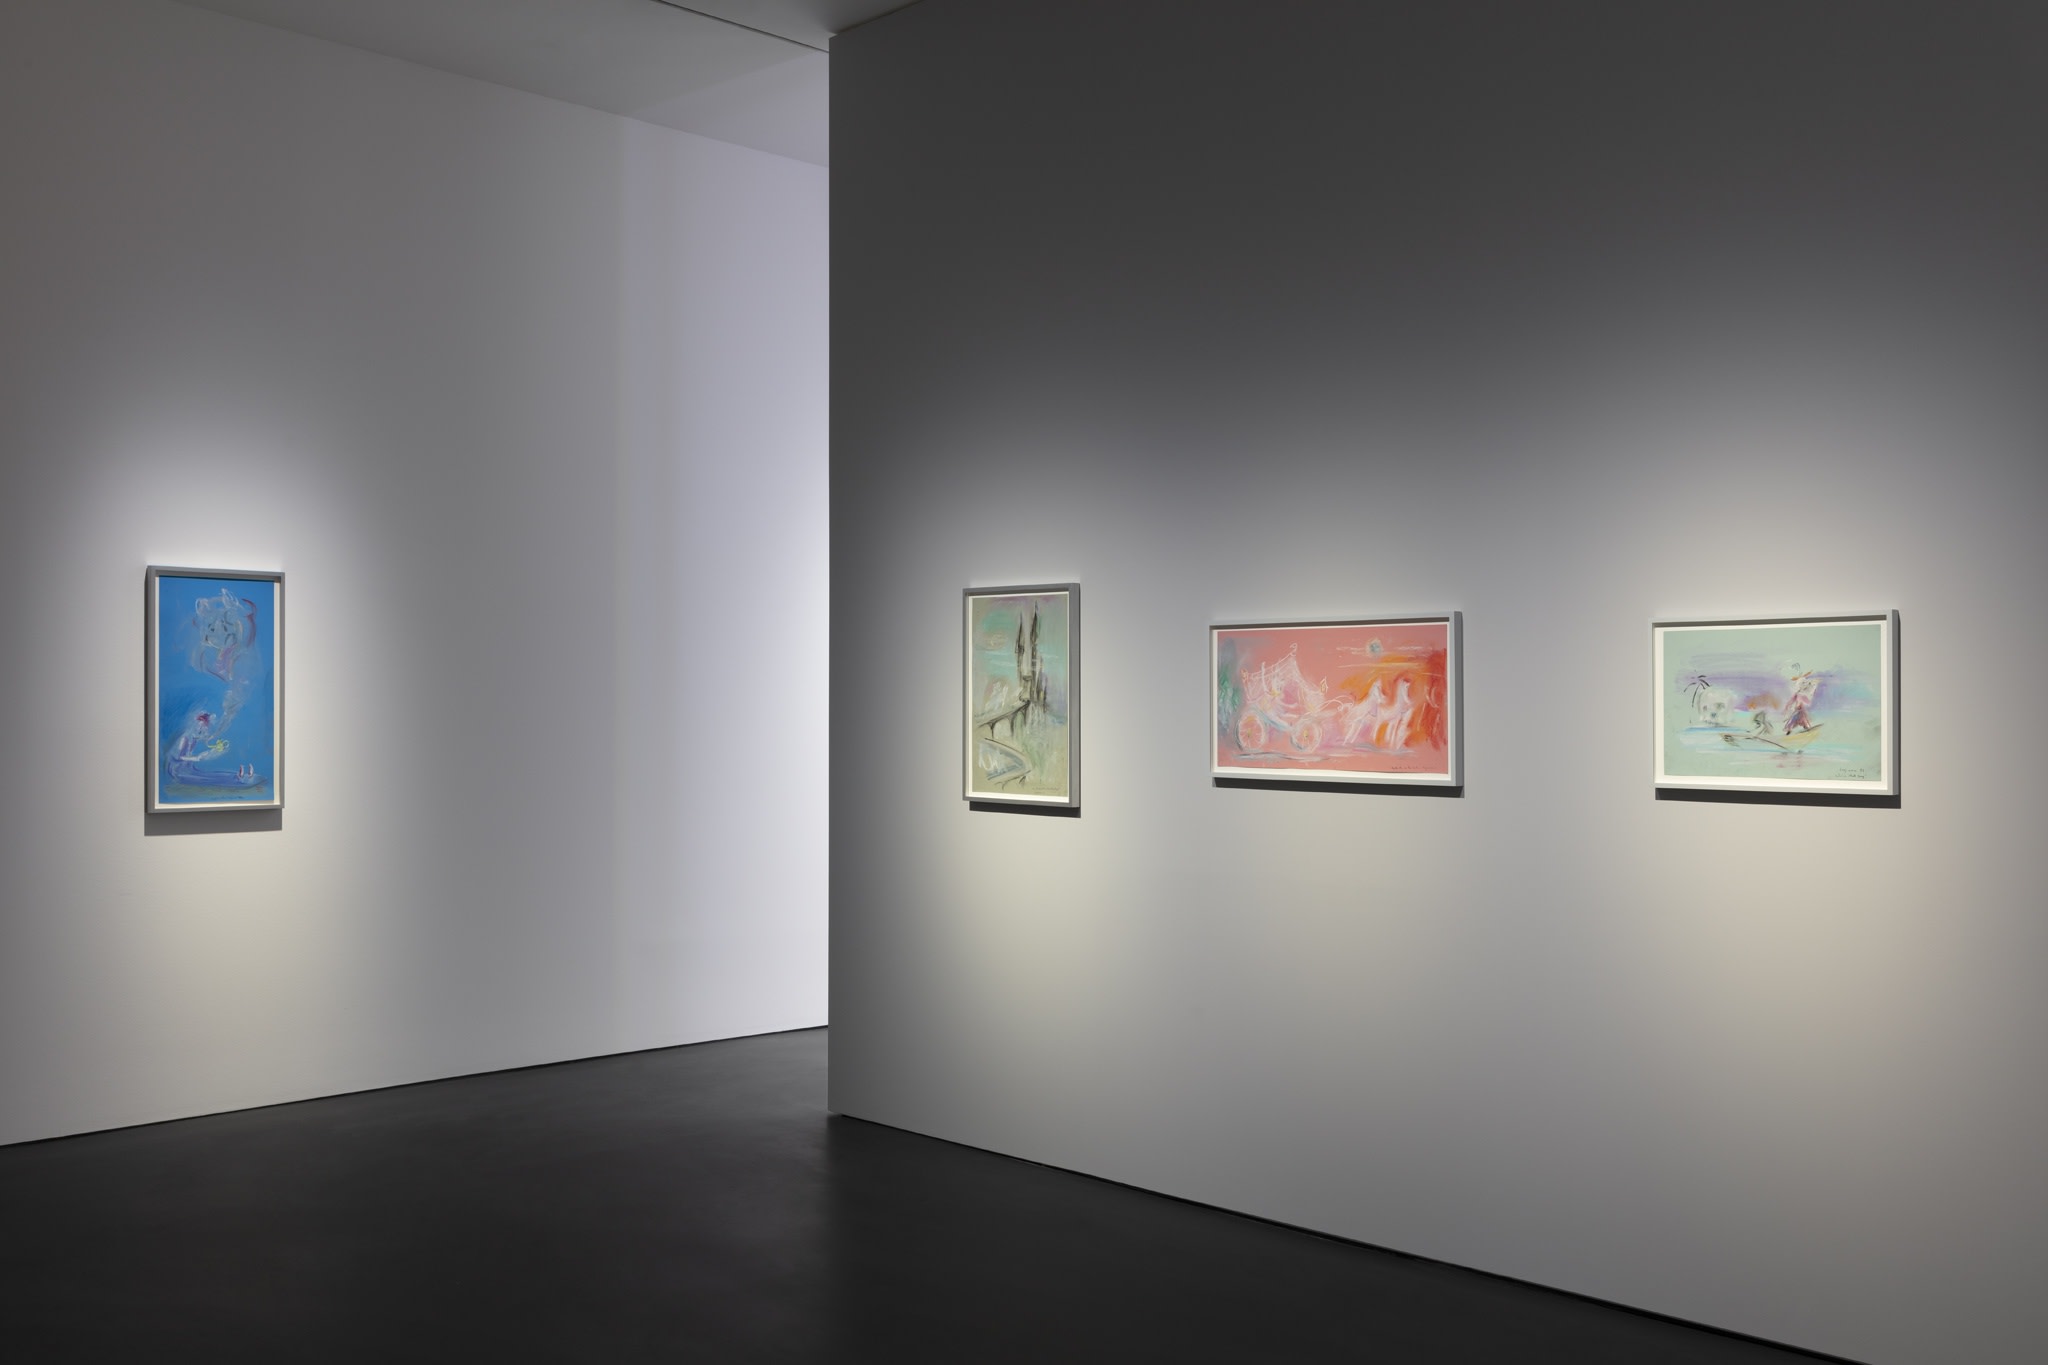 From left to right: Aladdin Who Makes a Wish?, 2022, pastel on paper, 86,5 x 46,5 x 3,5 cm (34 1/8 x 18  x 1 3/8 in) (framed) (SF 257); Who’s a Knight in Shining Armour?, 2022, pastel on paper, 71,5 x 51,5 x 3,5 cm (28 1/8 x 20 1/4 x 1 3/8 in) (framed) (SF 258); Cinderella Who on Their Way To...?, 2022, pastel on paper, 46,5 x 86,5 x 3,5 cm (18 1/4 x 34 1/8 x 1 3/8 in) (framed) (SF 255); Who’s the Pirate of Skull Bay?, 2022, pastel on paper, 42 x 58,4 x 3,5 cm (16 1/2 x 23 x 1 1/8 in) (framed) (SF 256). Exhibition view: Simon Fujiwara, Once Upon a Who?, Esther Schipper, Berlin (2022). Photo © Andrea Rossetti